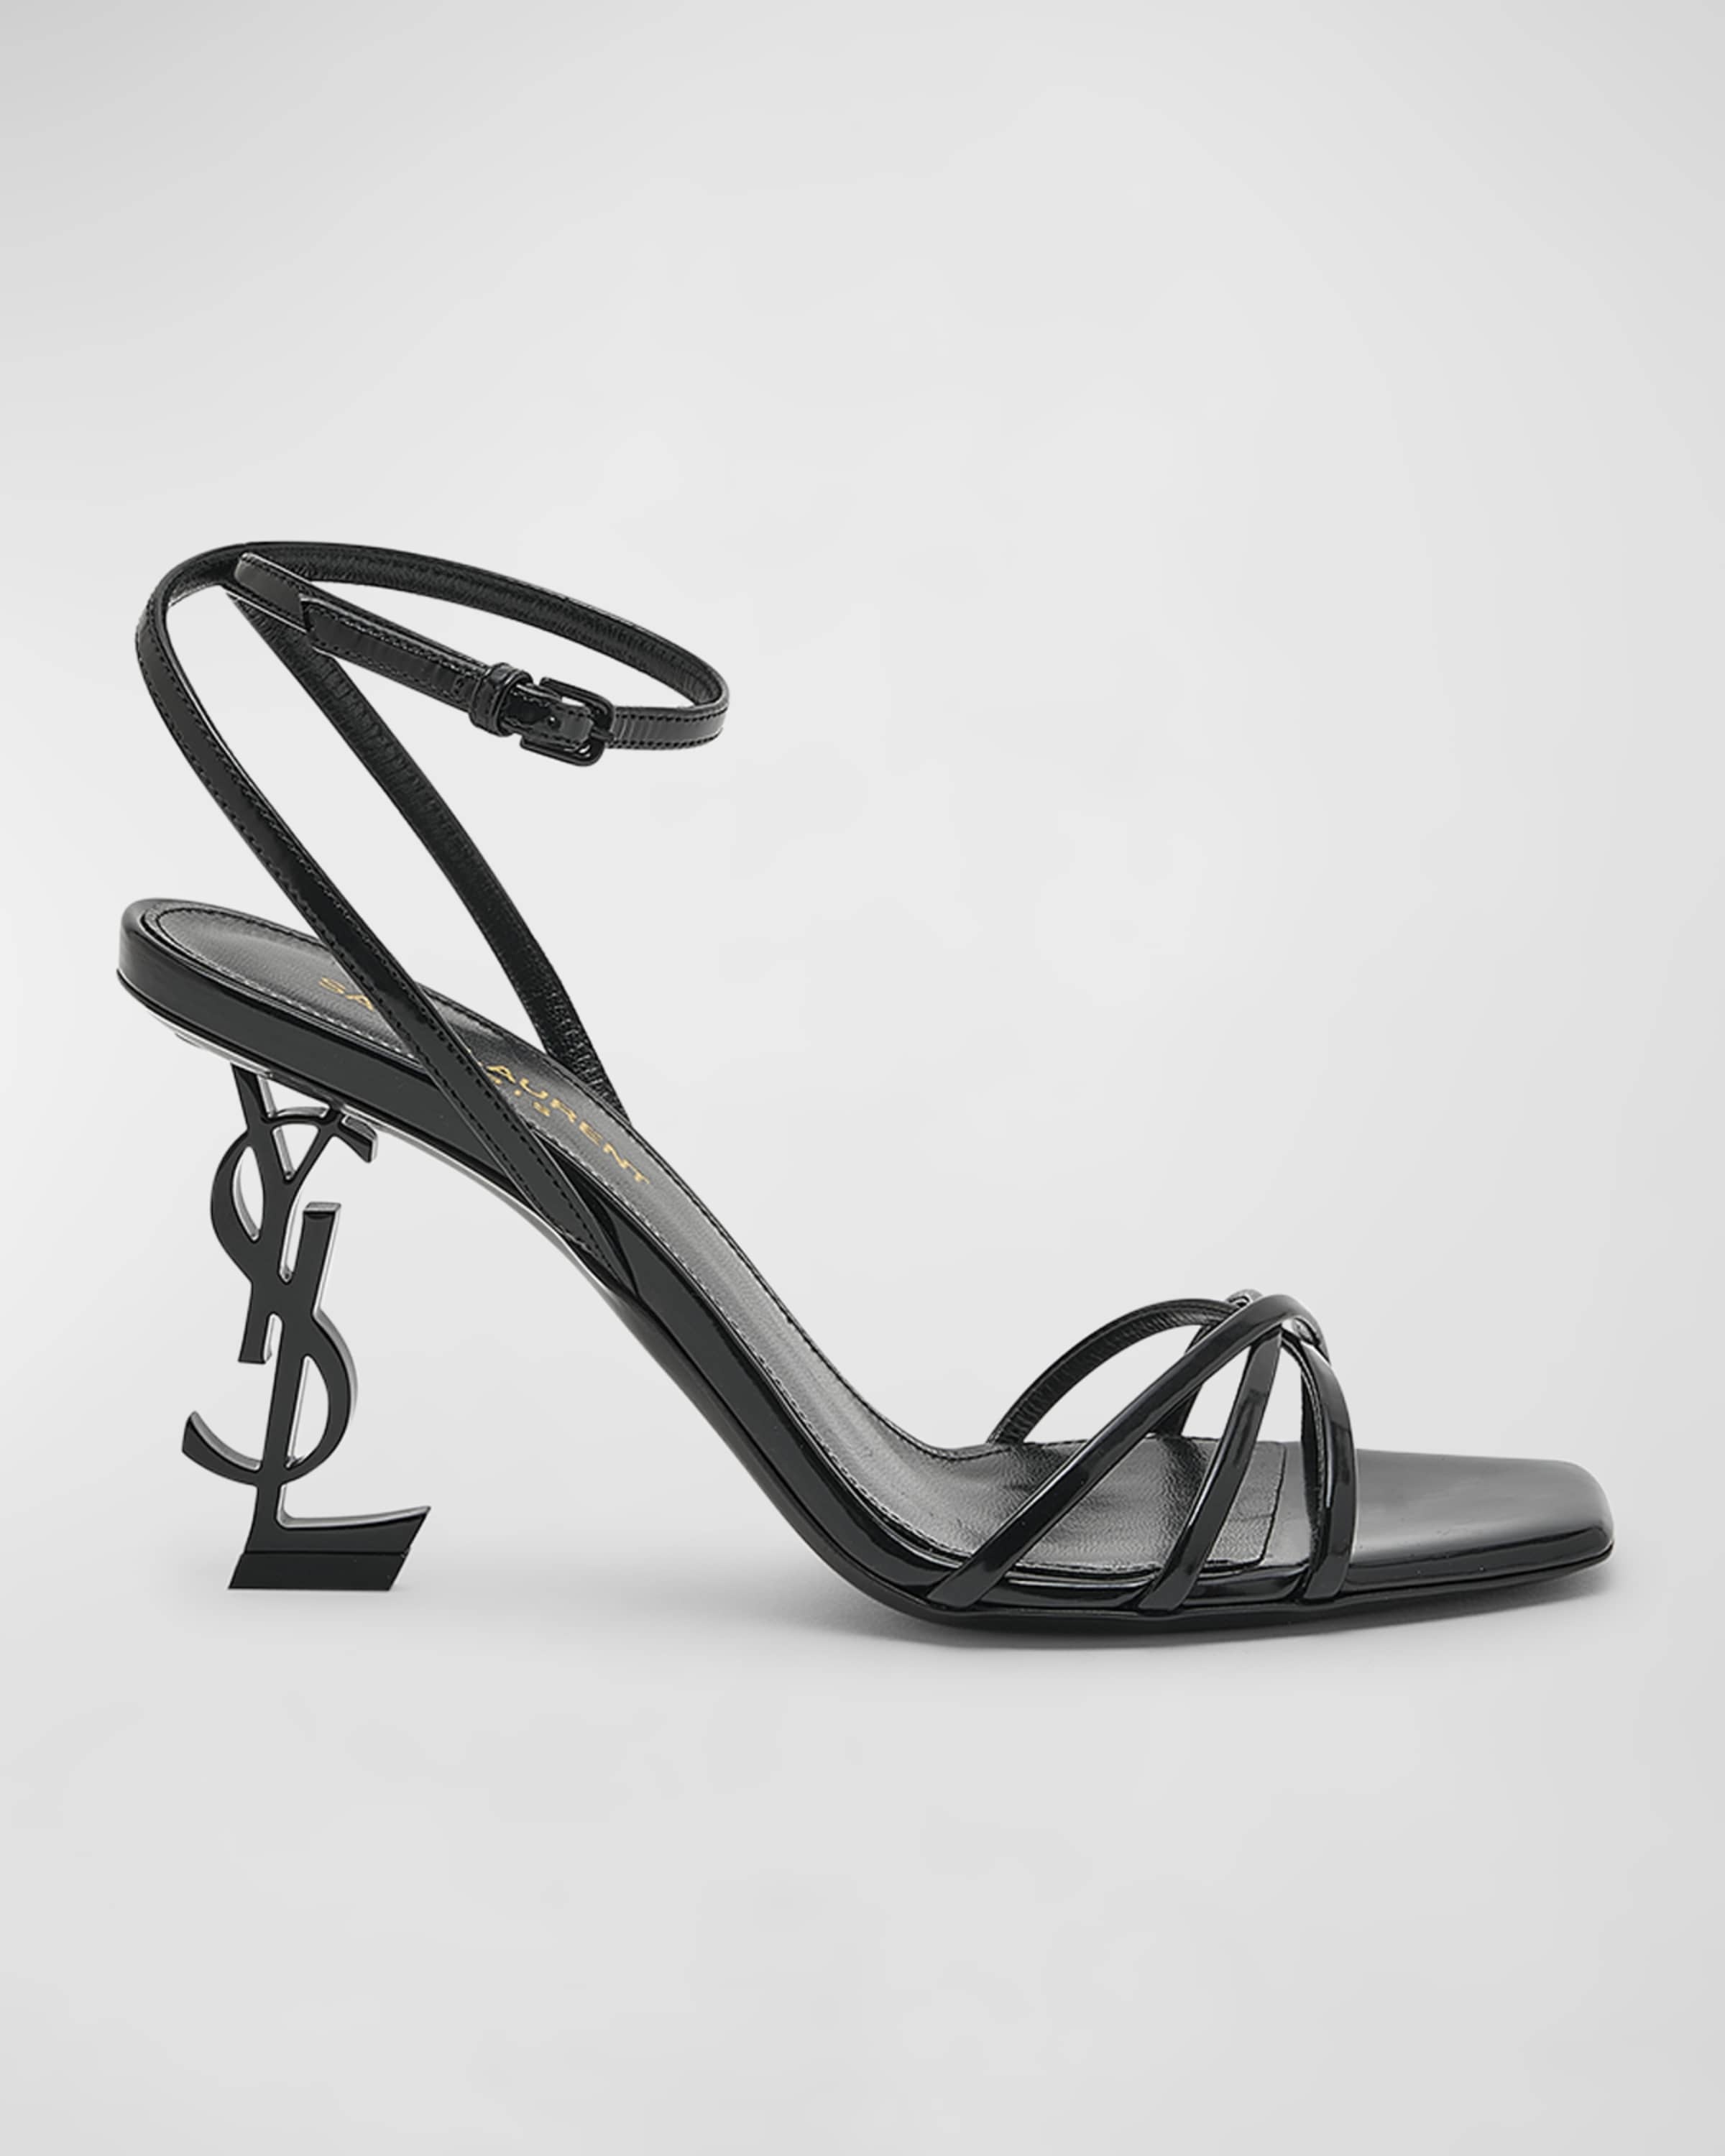 Opyum Patent YSL Ankle-Strap Sandals - 1